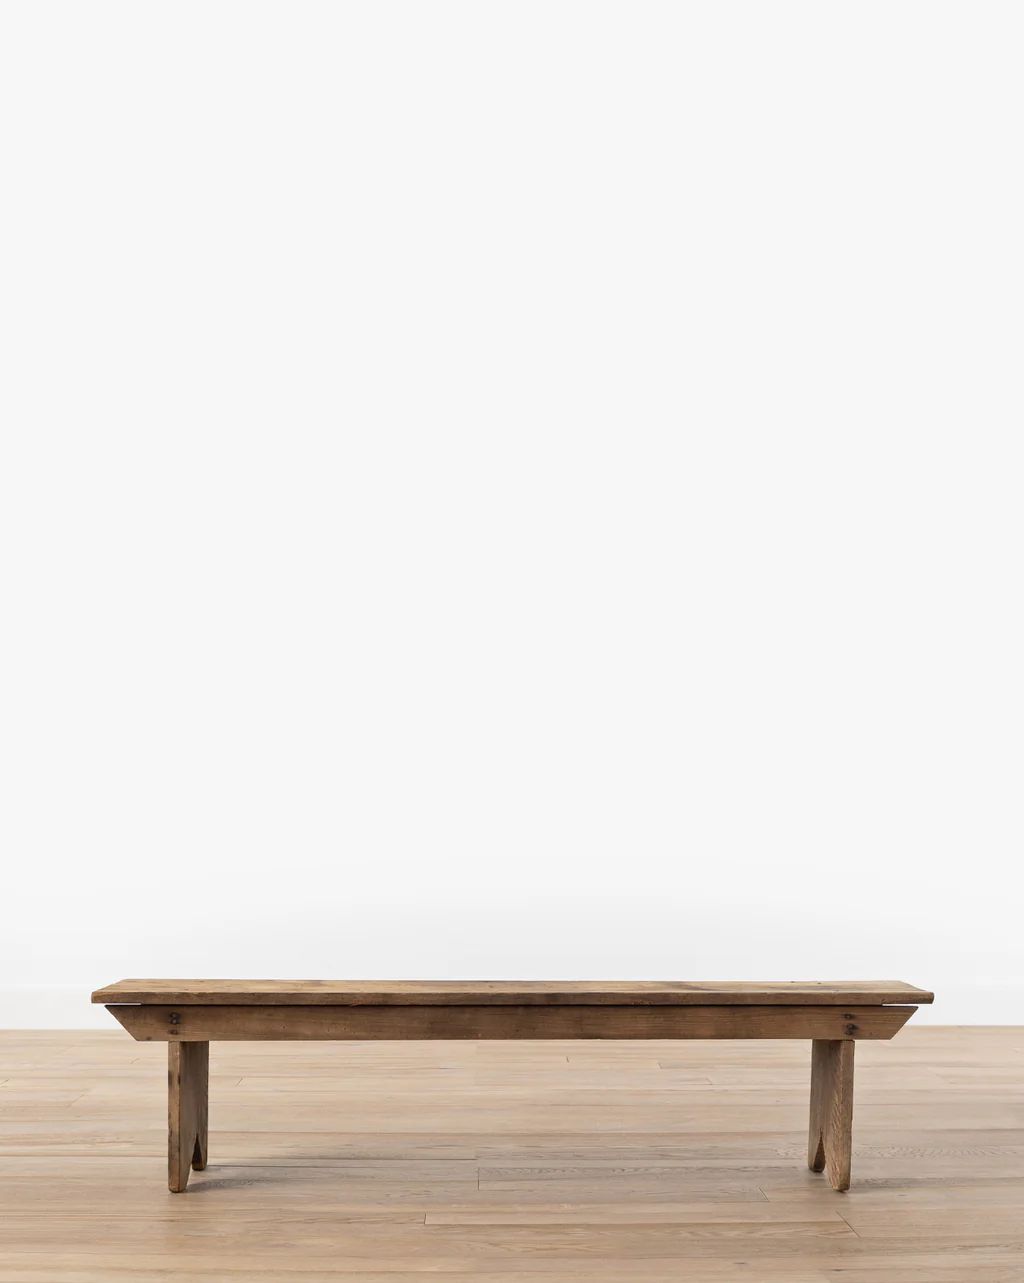 Vintage Wooden Bench with Natural Finish | McGee & Co.